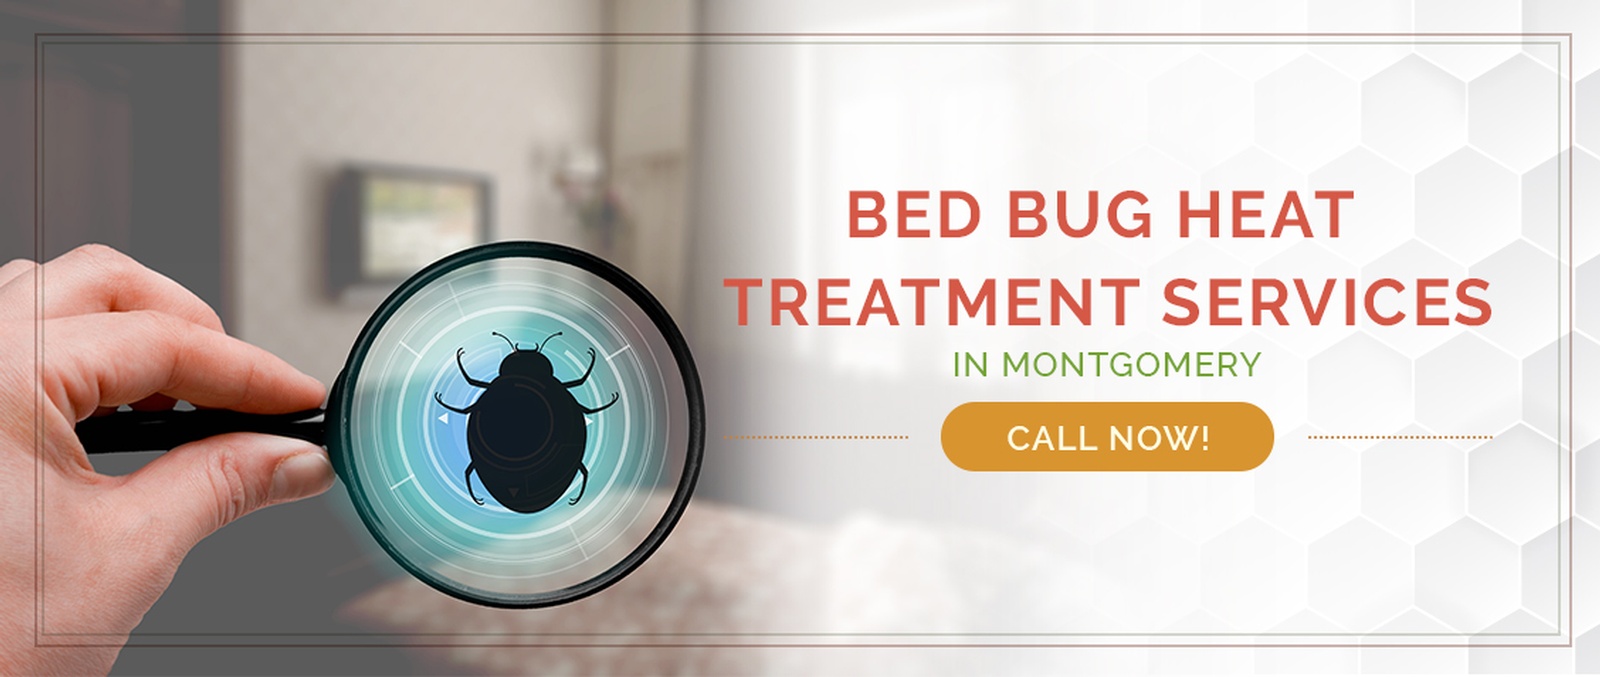 Montgomery Bed Bug Treatment / Heater Rental Services by Houston Bed Bug Heaters